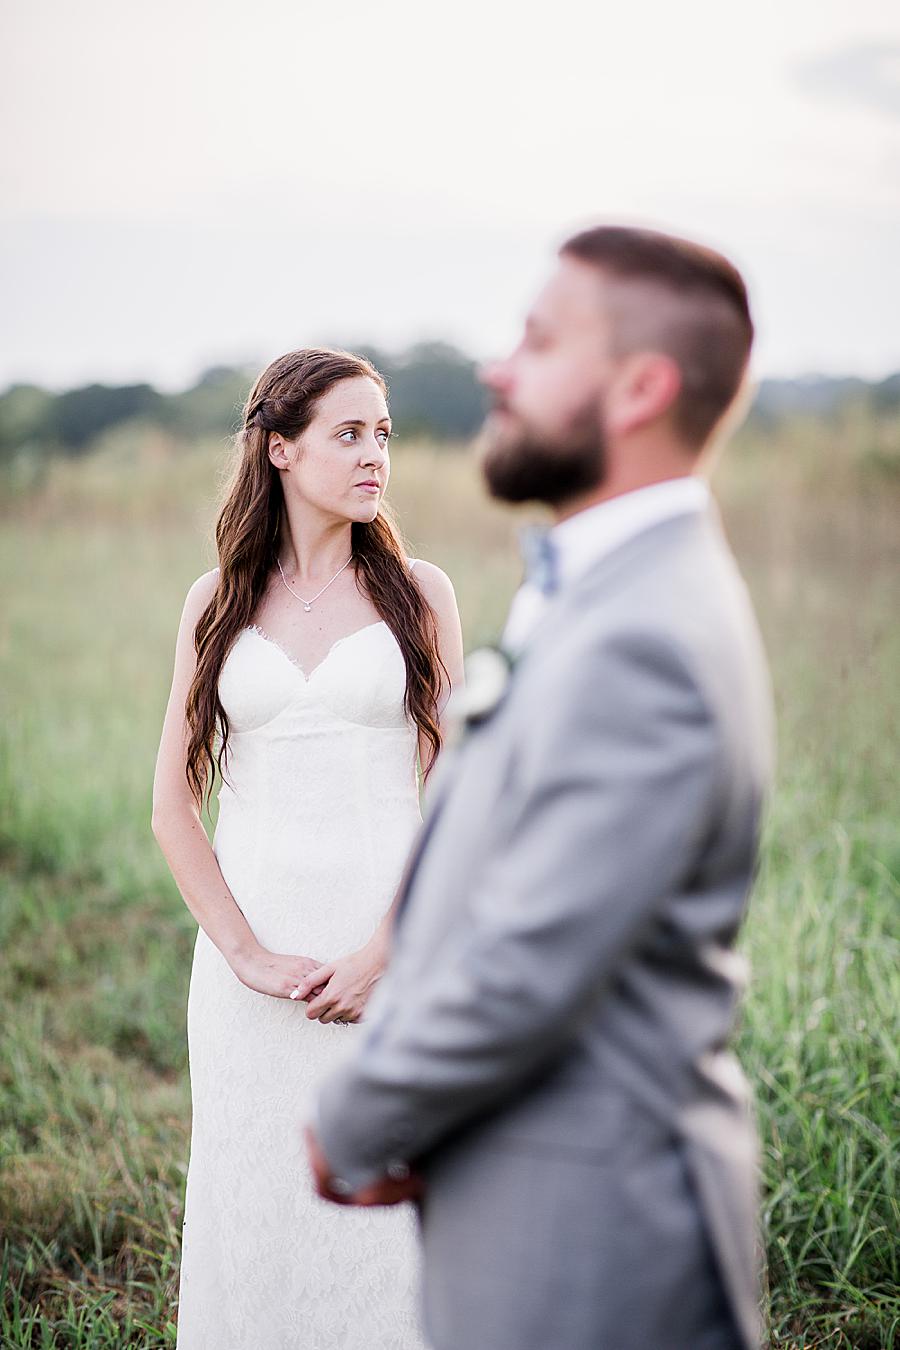 Focused on bride by Knoxville Wedding Photographer, Amanda May Photos.